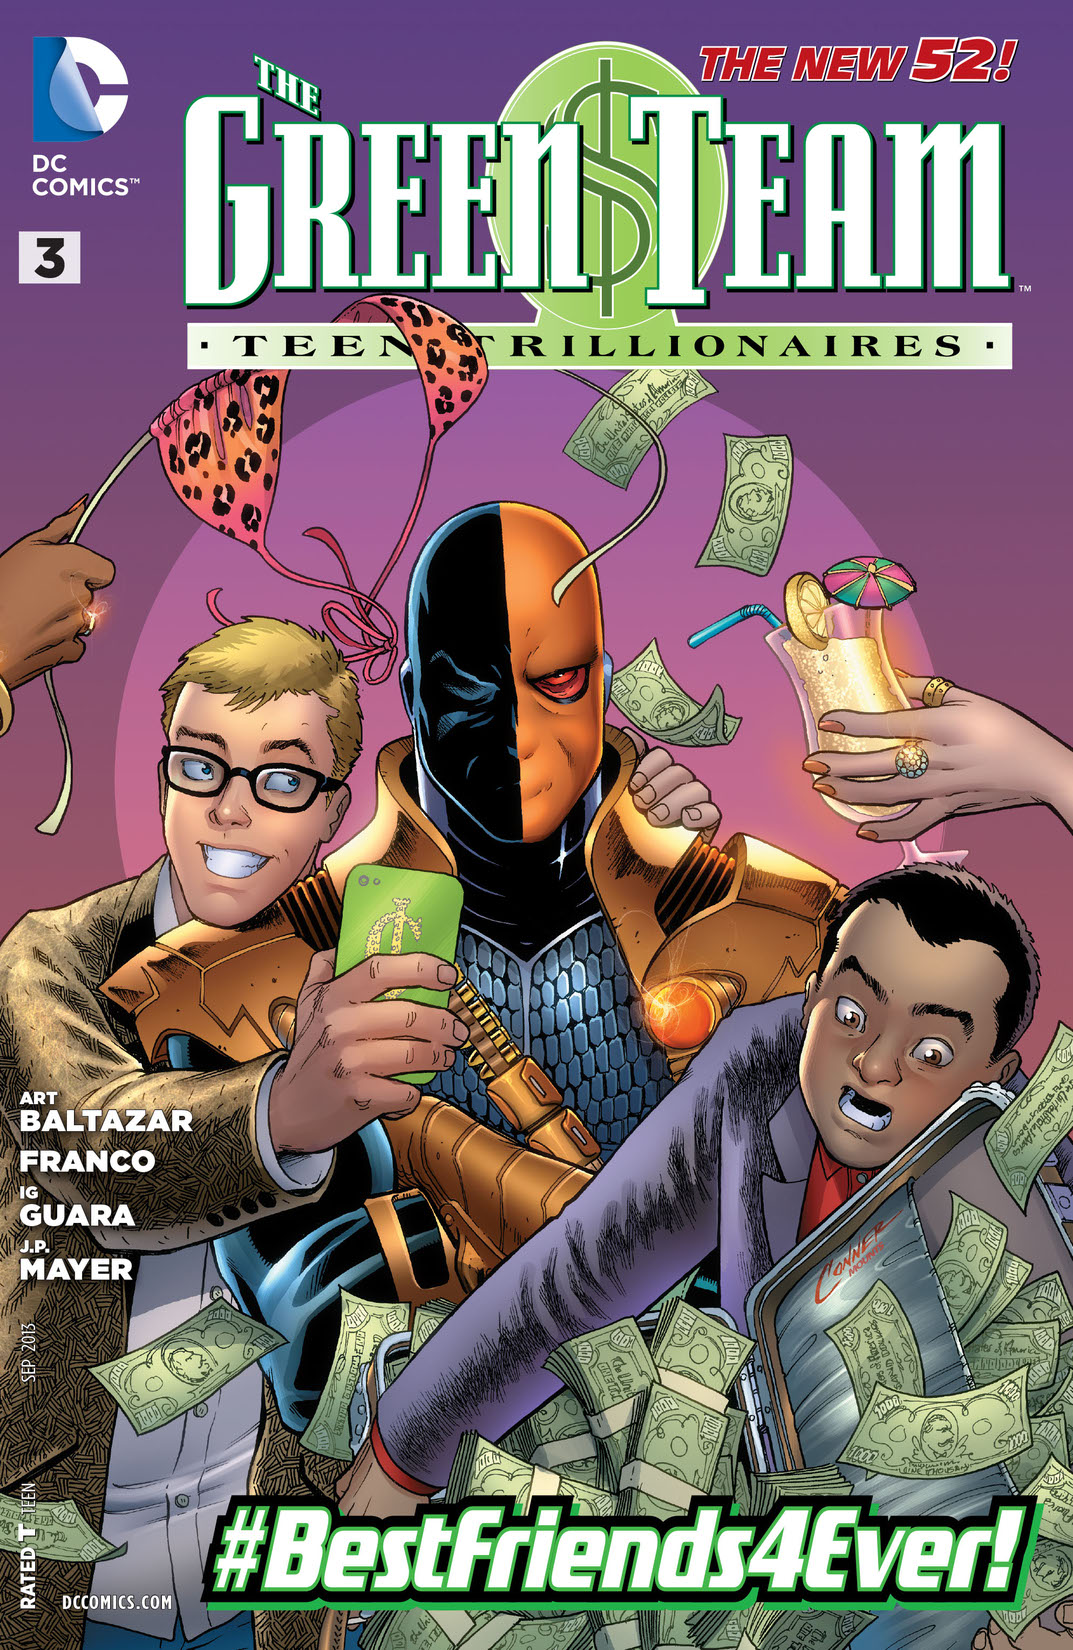 The Green Team: Teen Trillionaires (2013-) #3 preview images